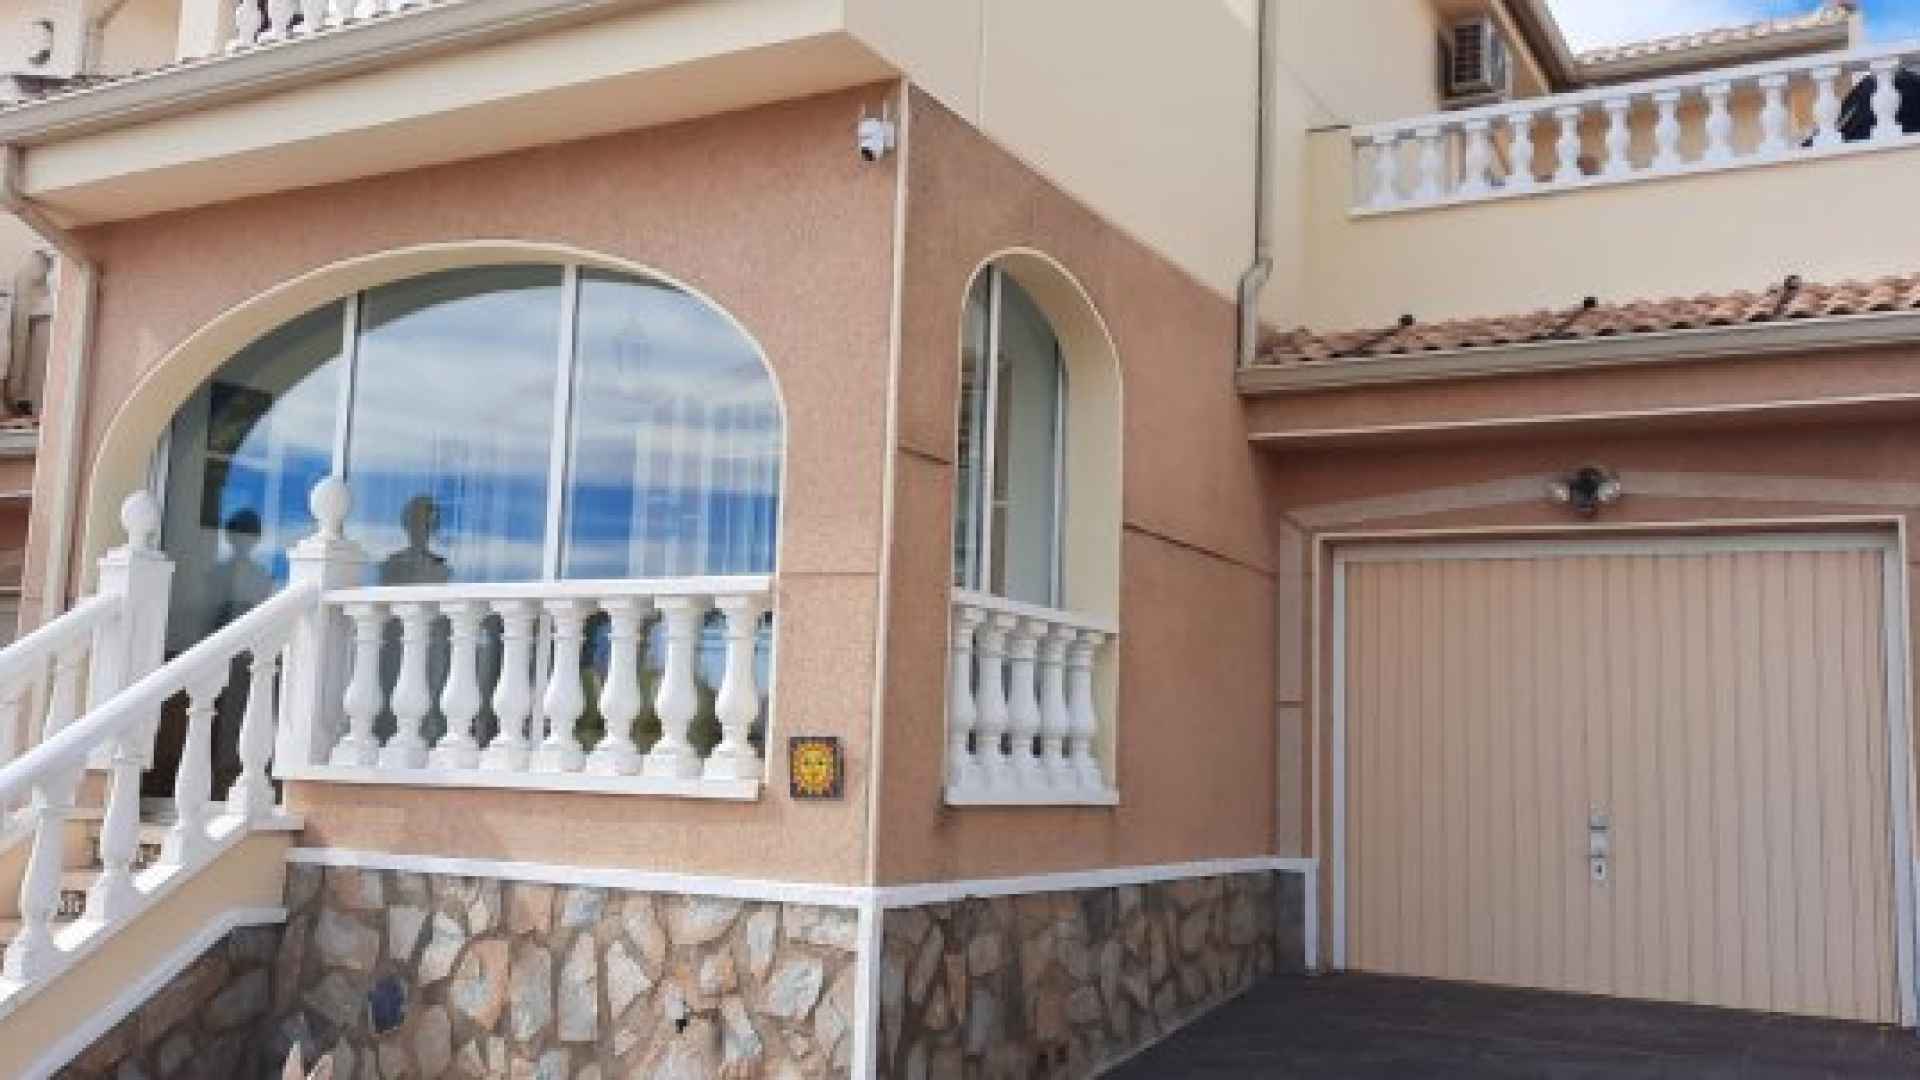 medium_14629_lovely_townhouse_on_gated_community_with_sea_views_from_two_private_balconies._021123120211_sr1337_hardie_(71)